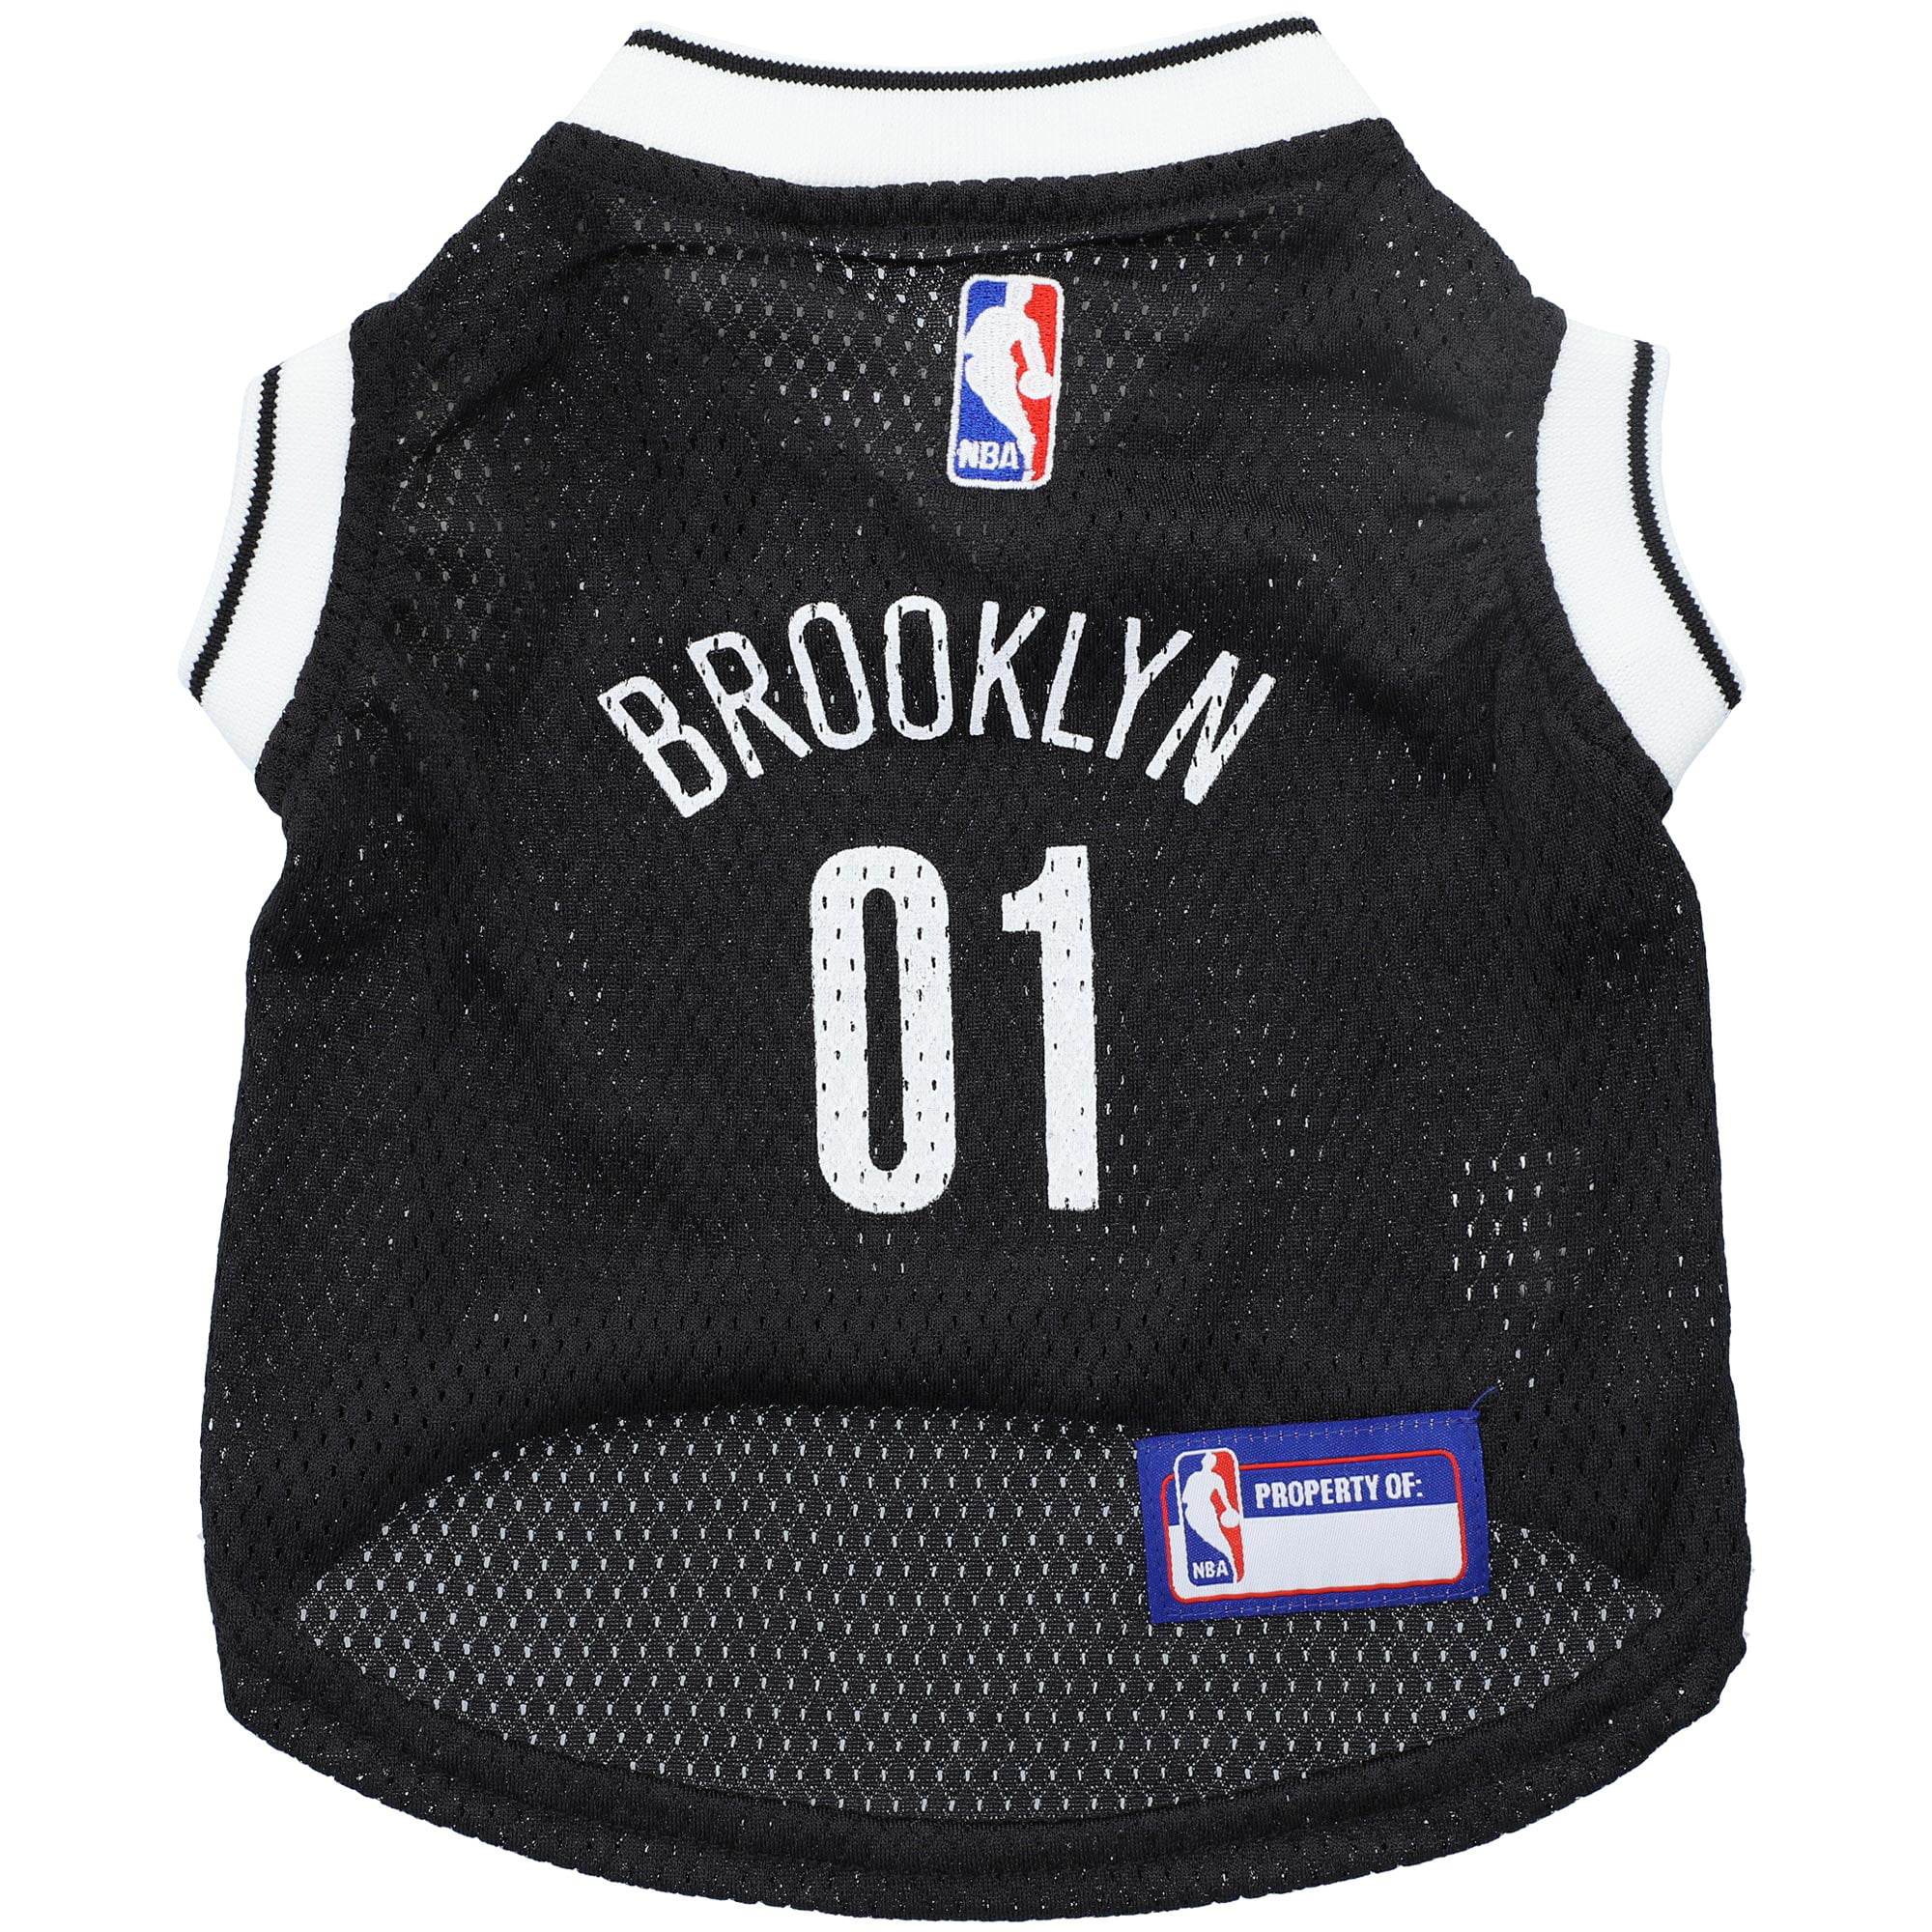 NEW Custom Brooklyn Nets Basket Ball Pillow Case With Your Name and Numbers 